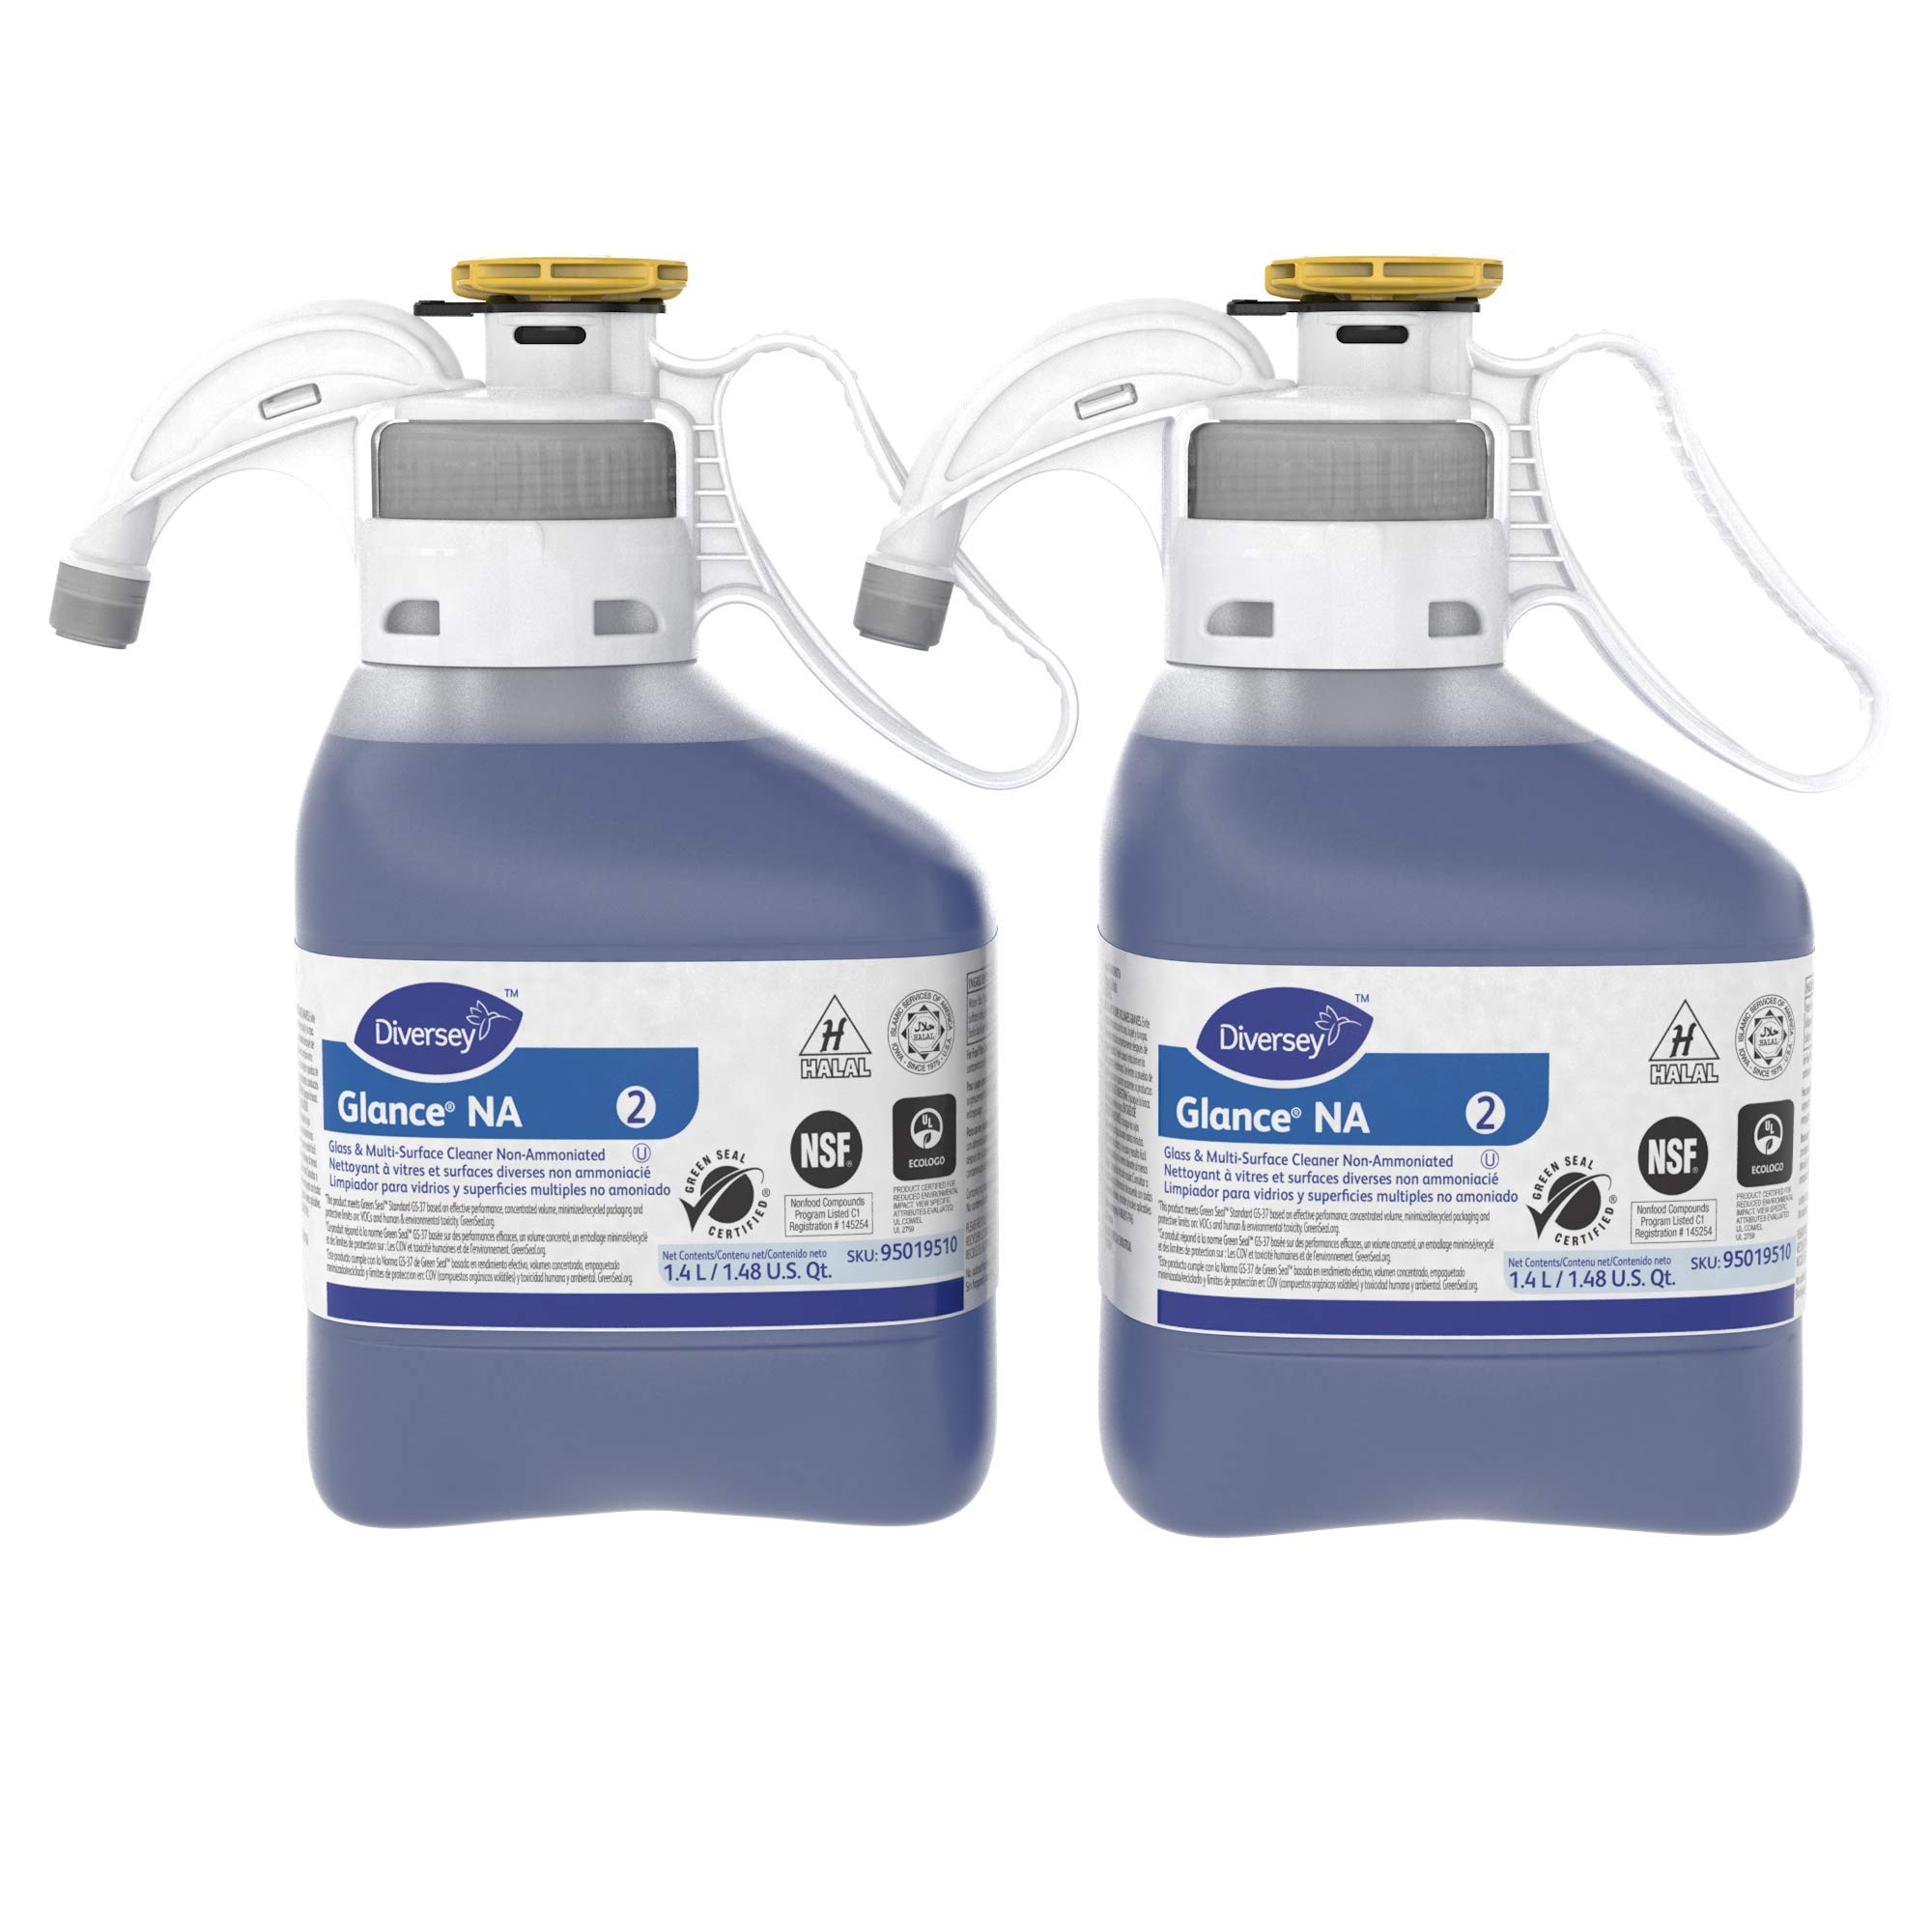 Glance Glass and Multi-Surface Cleaner (Non-Ammonia, 1.4-Liter, Case of 2)